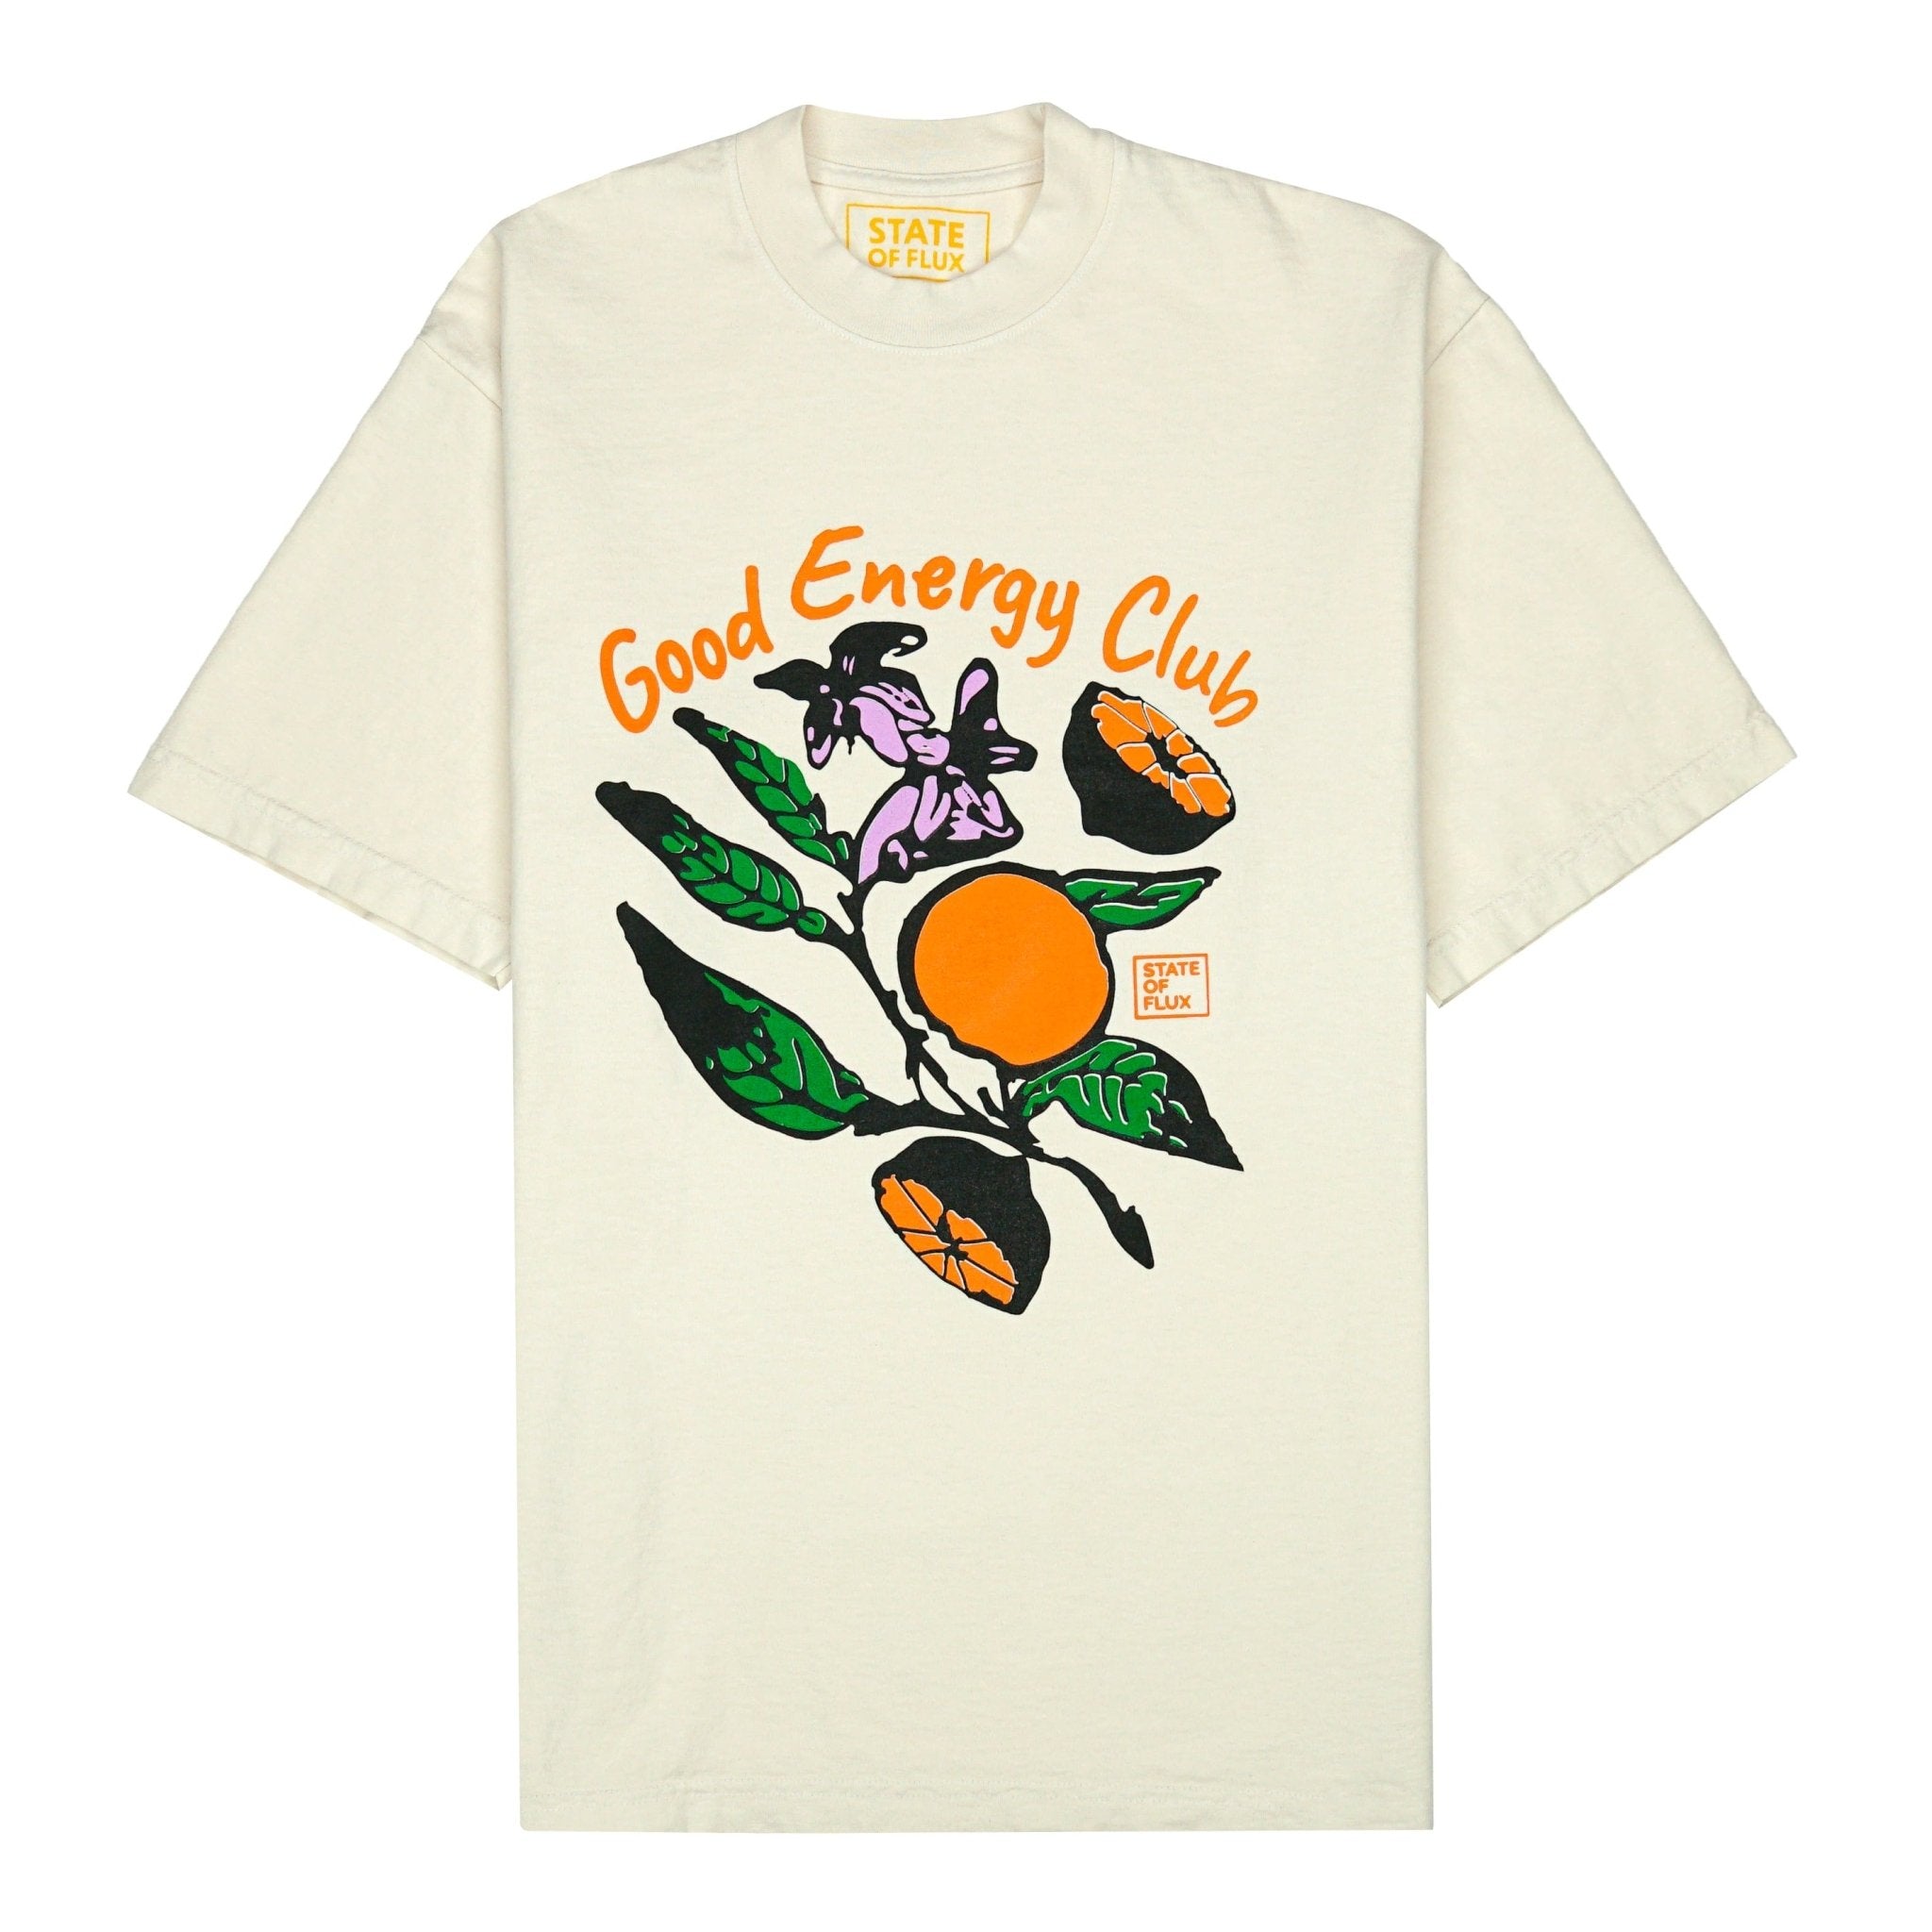 SOF Good Energy Club Tee in cream - State Of Flux - State Of Flux